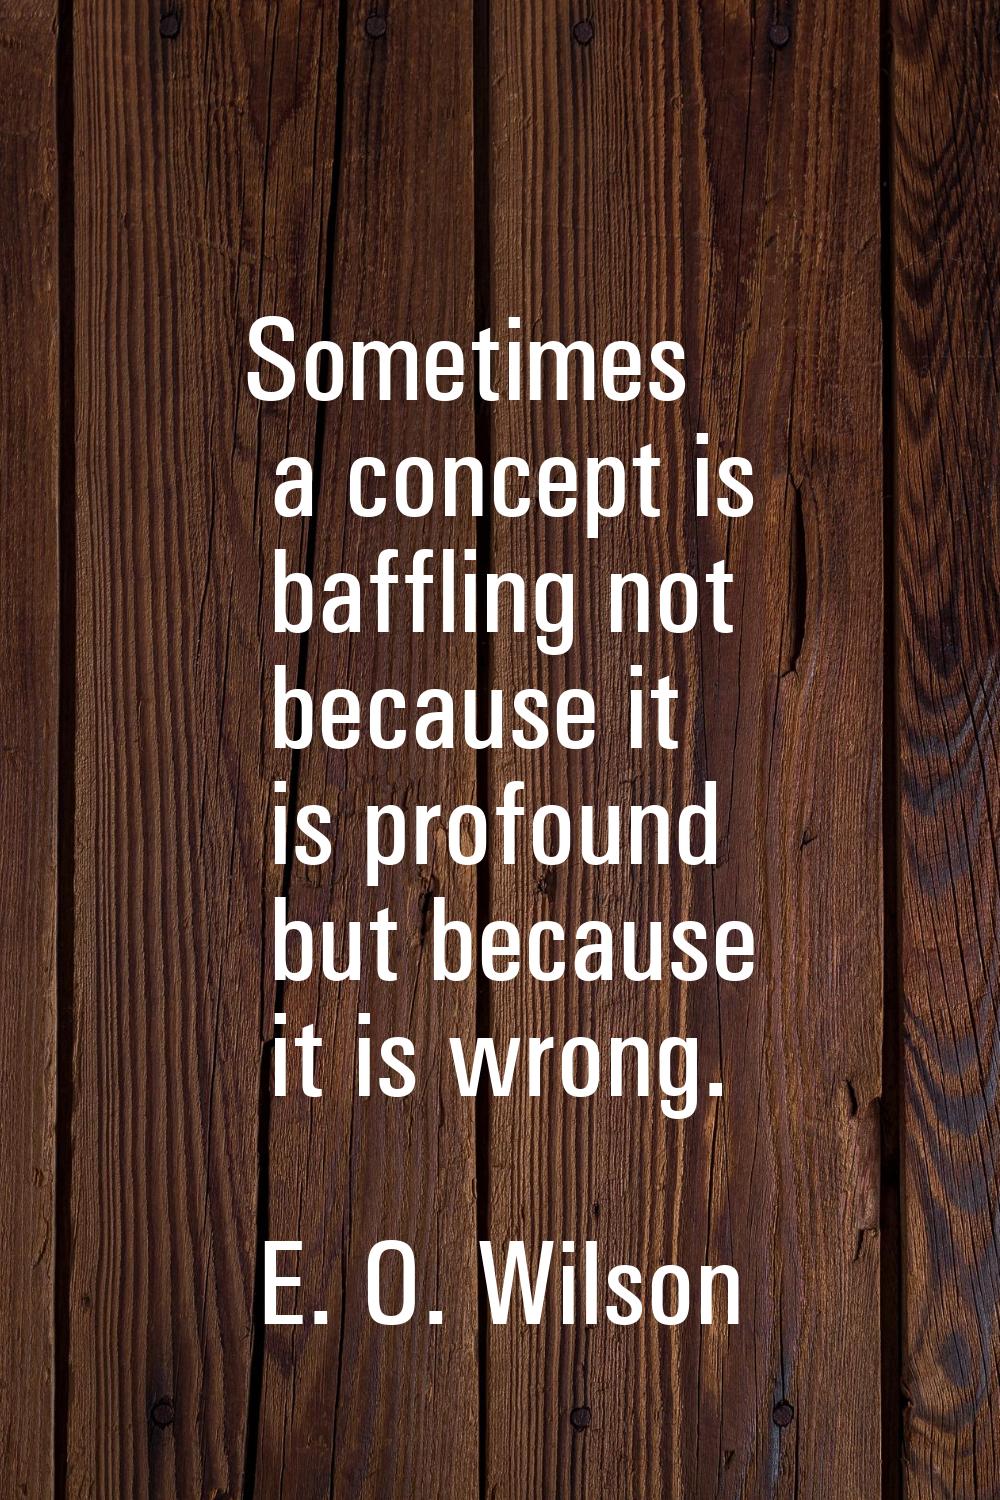 Sometimes a concept is baffling not because it is profound but because it is wrong.